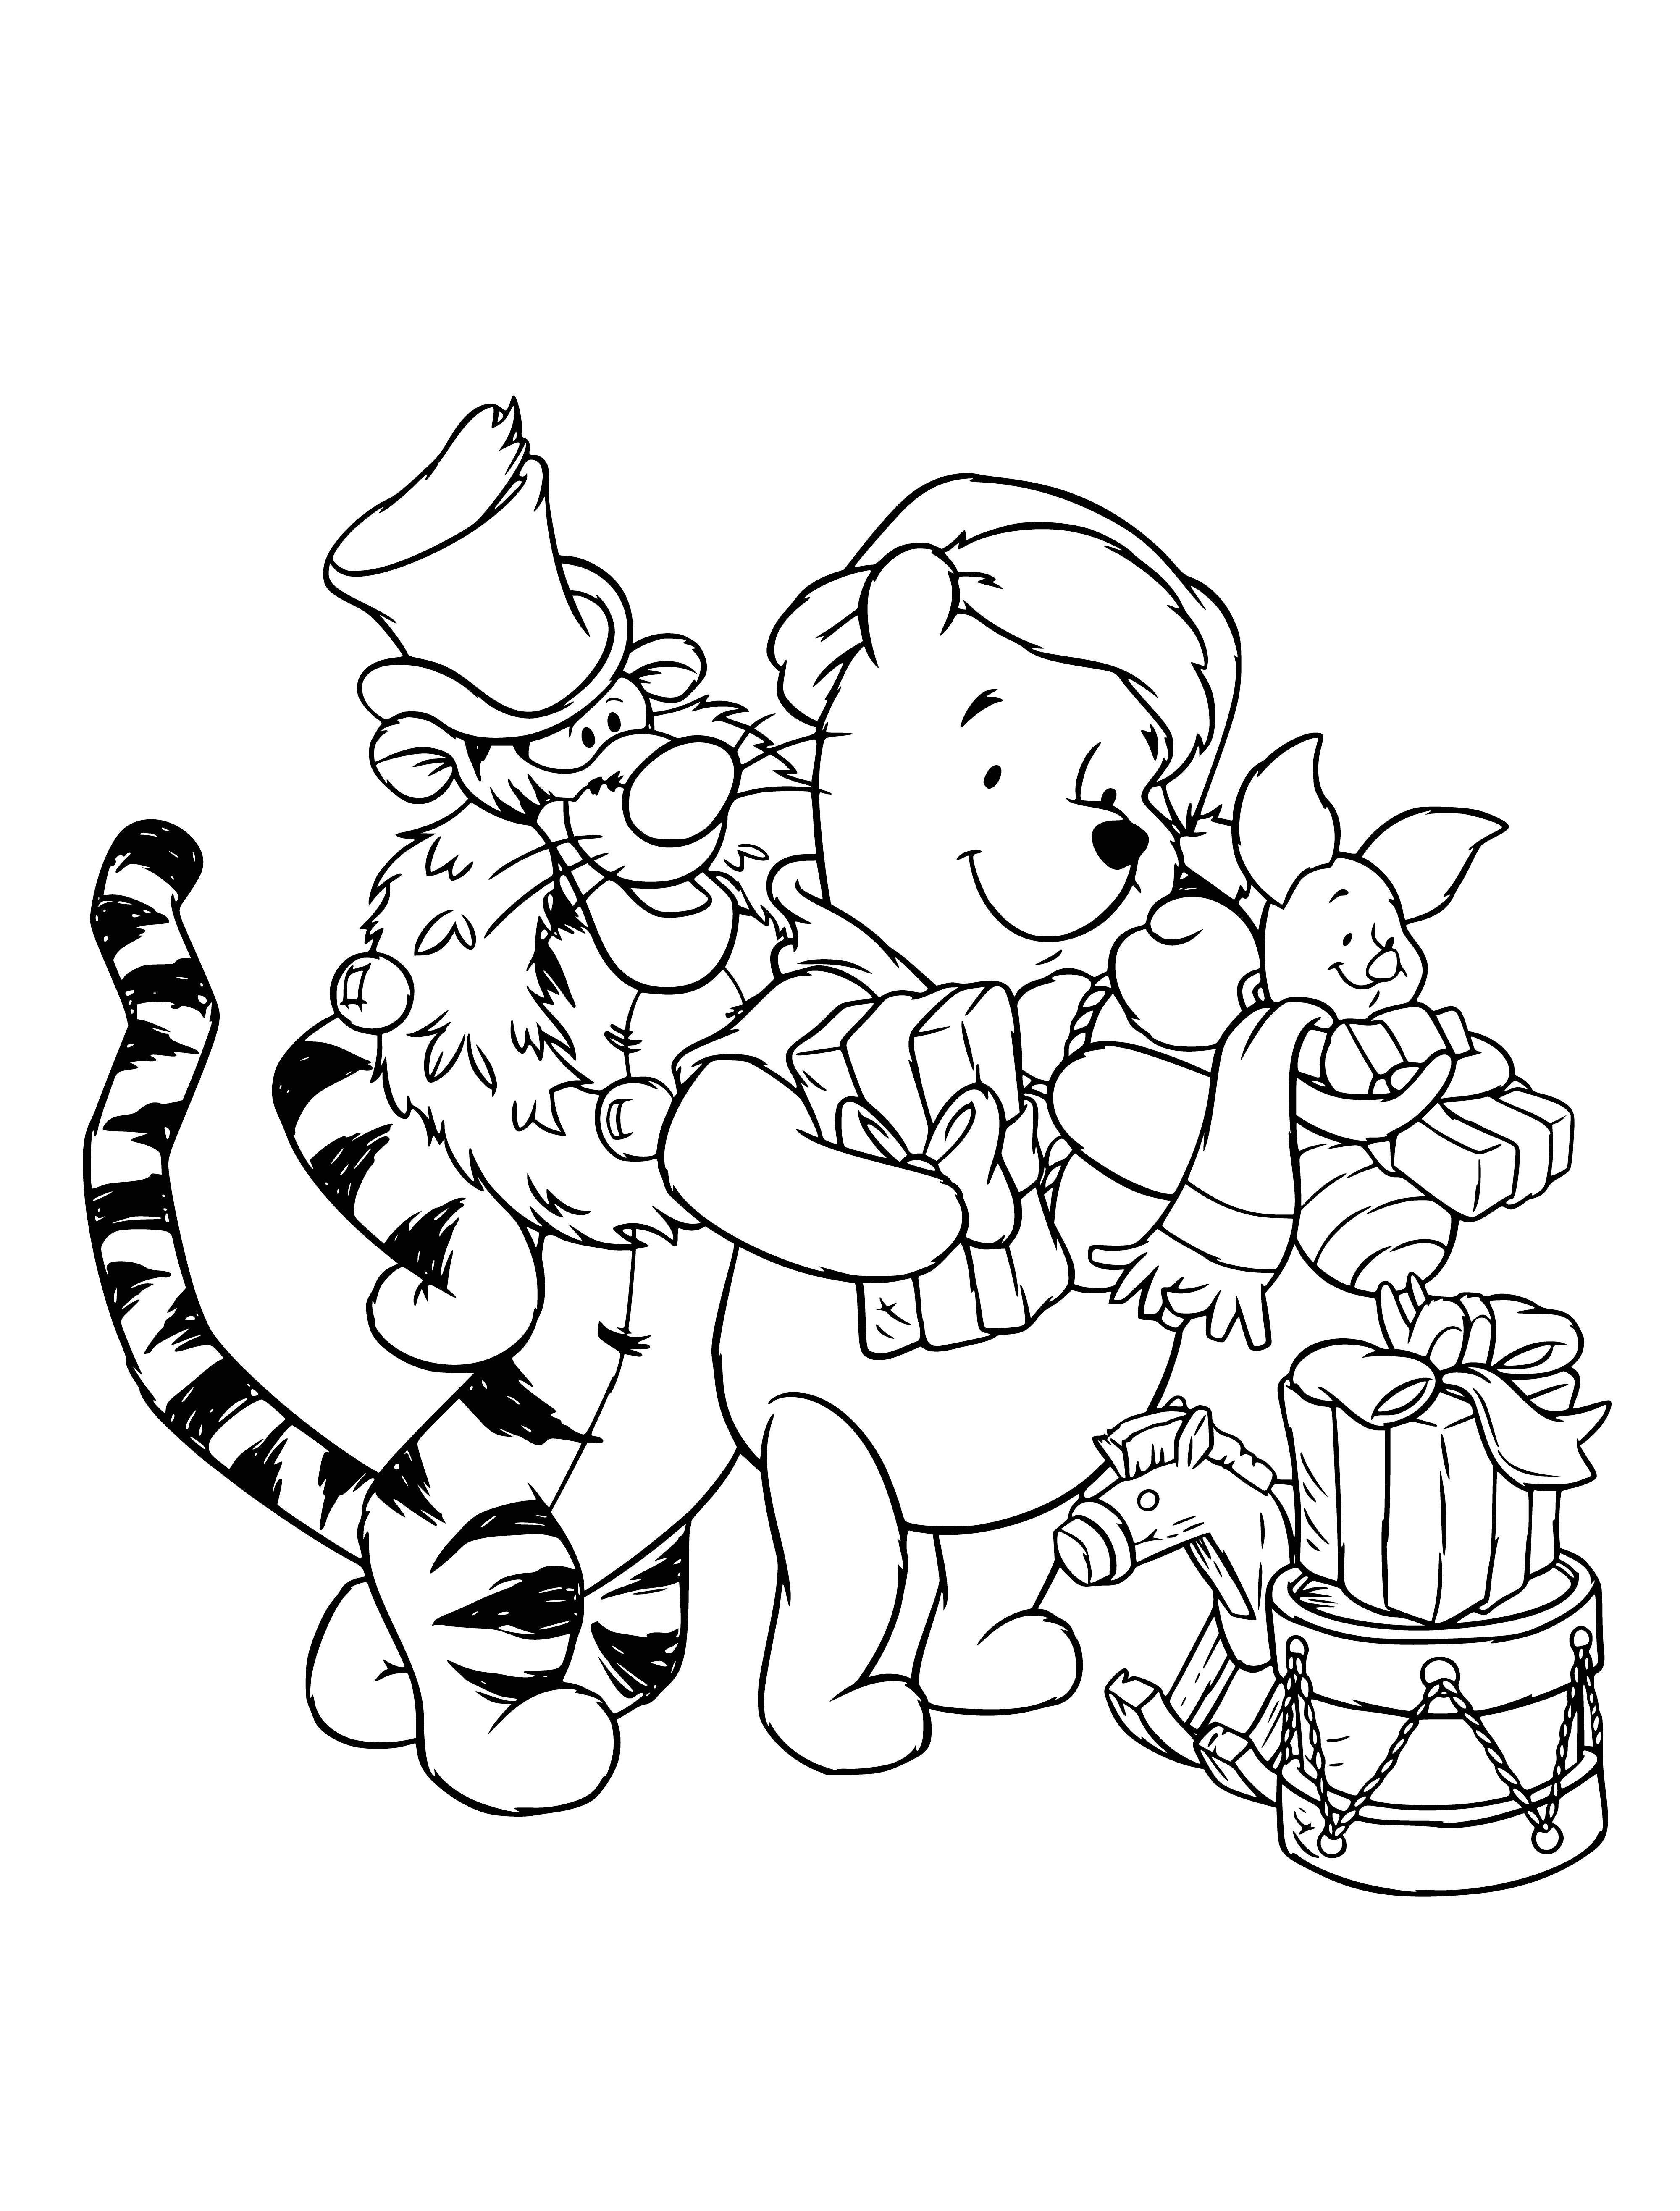 coloring page: Disney characters celebrate the New Year with Christmas gifts and gather around a tree with presents underneath.